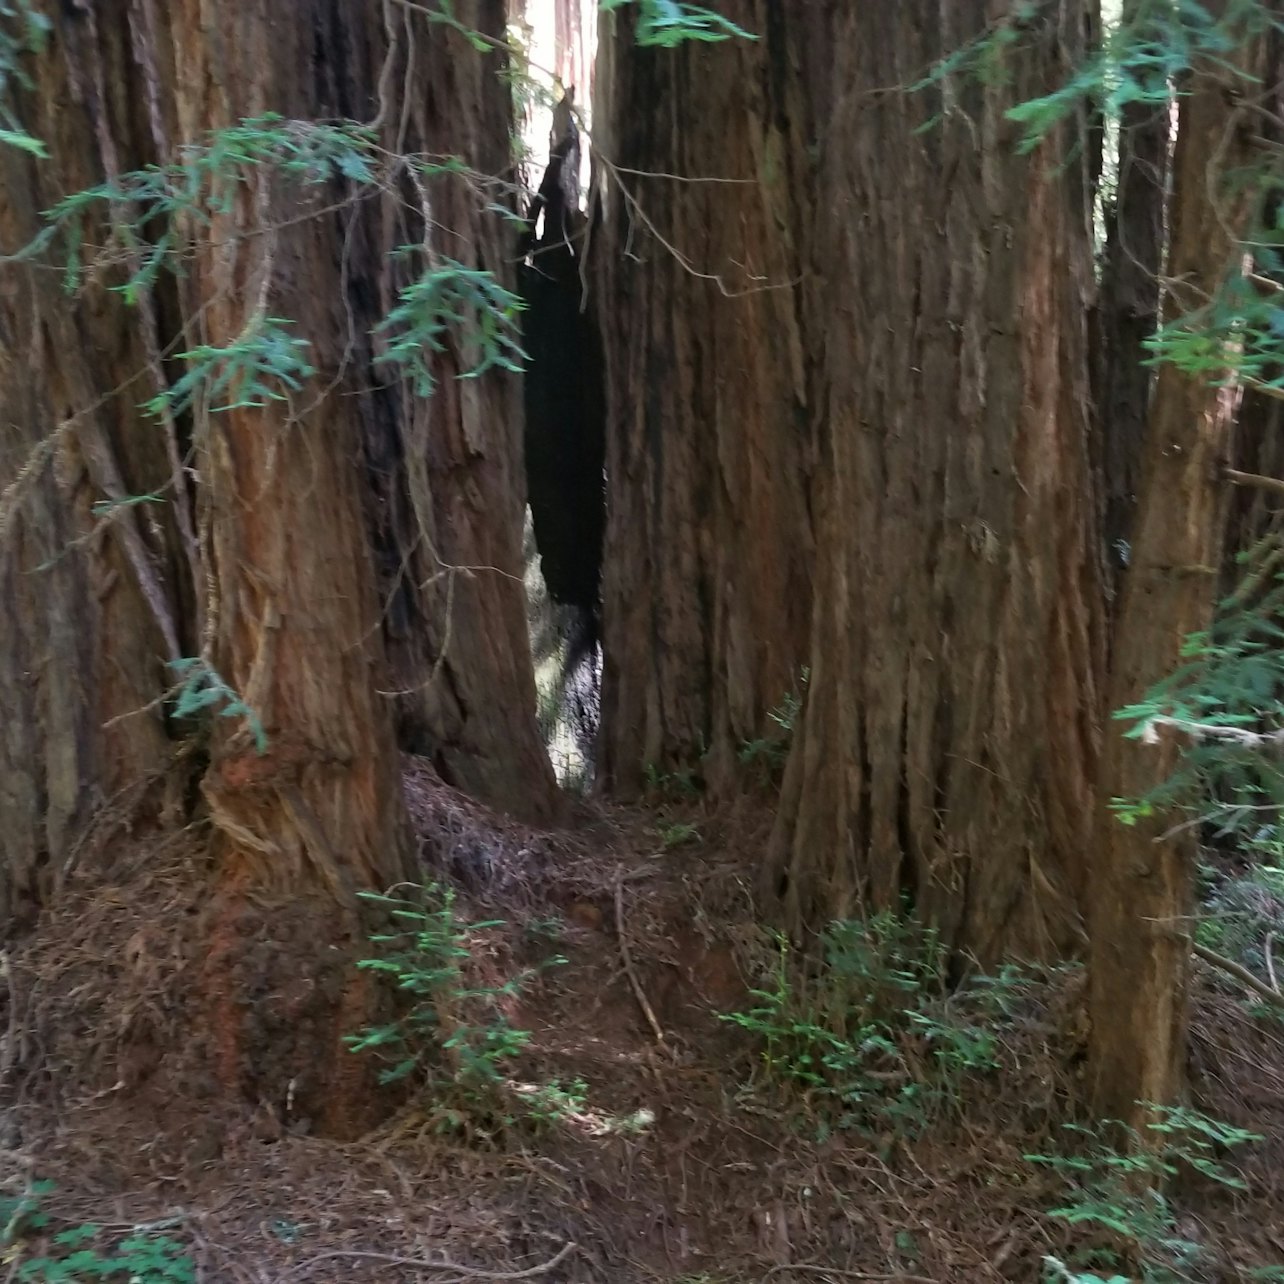 Muir Woods and Sausalito Tour from San Francisco Ticket - Accommodations in San Francisco